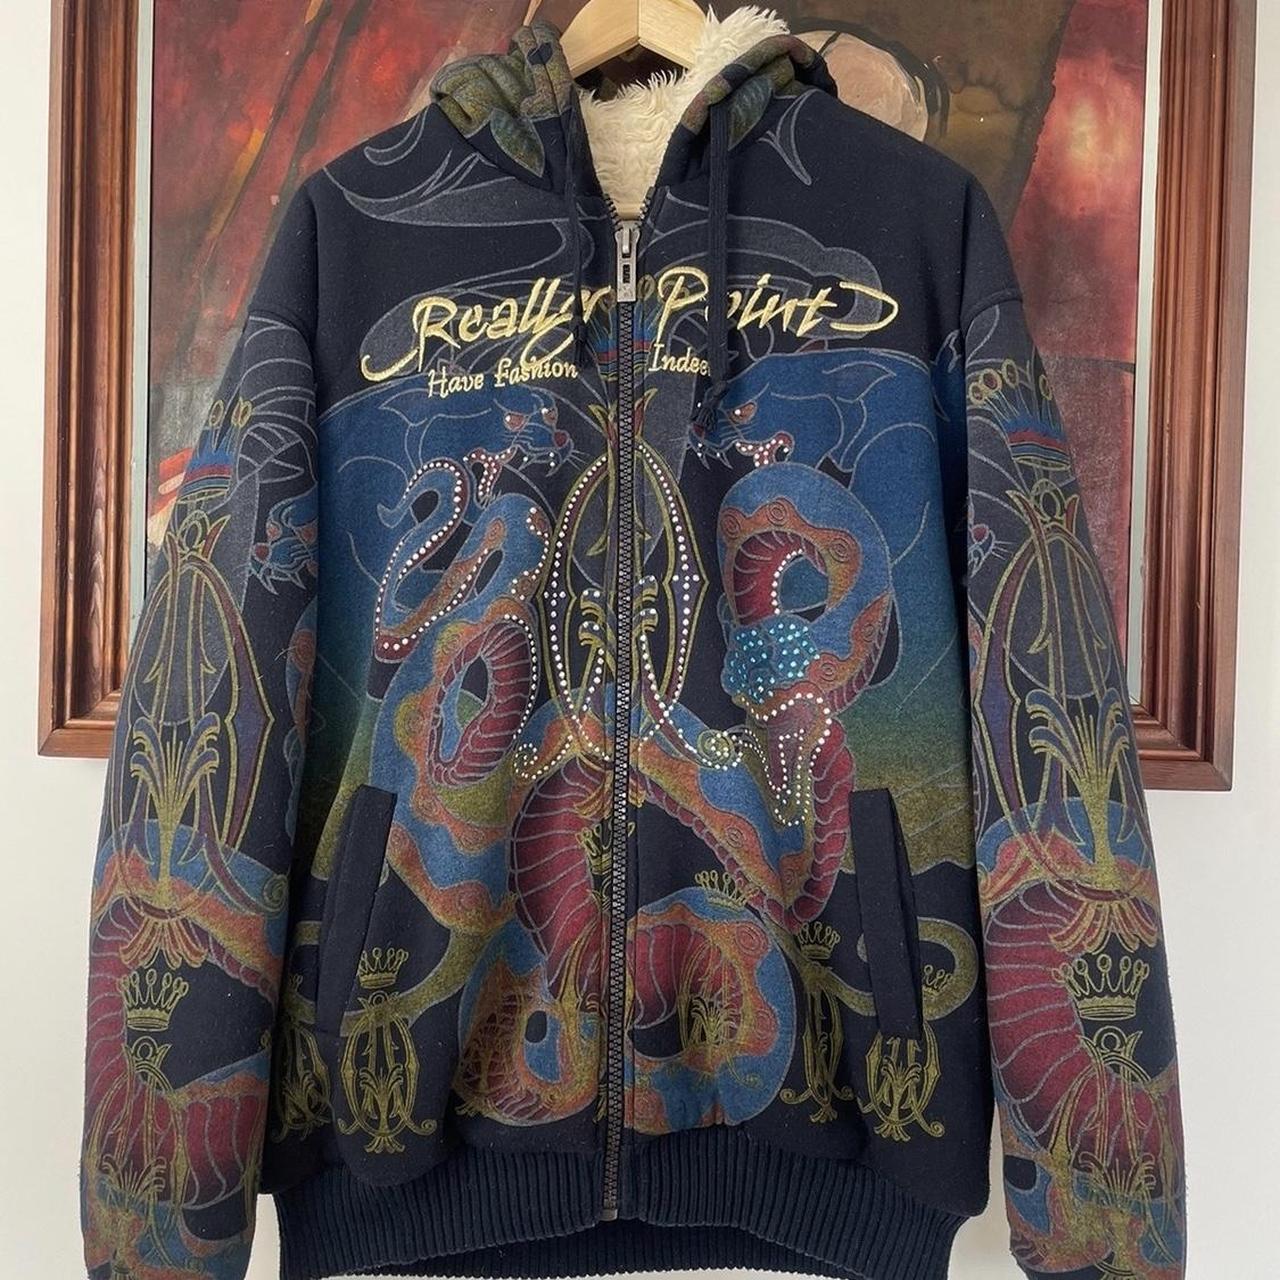 Ed Hardy's long road to redemption